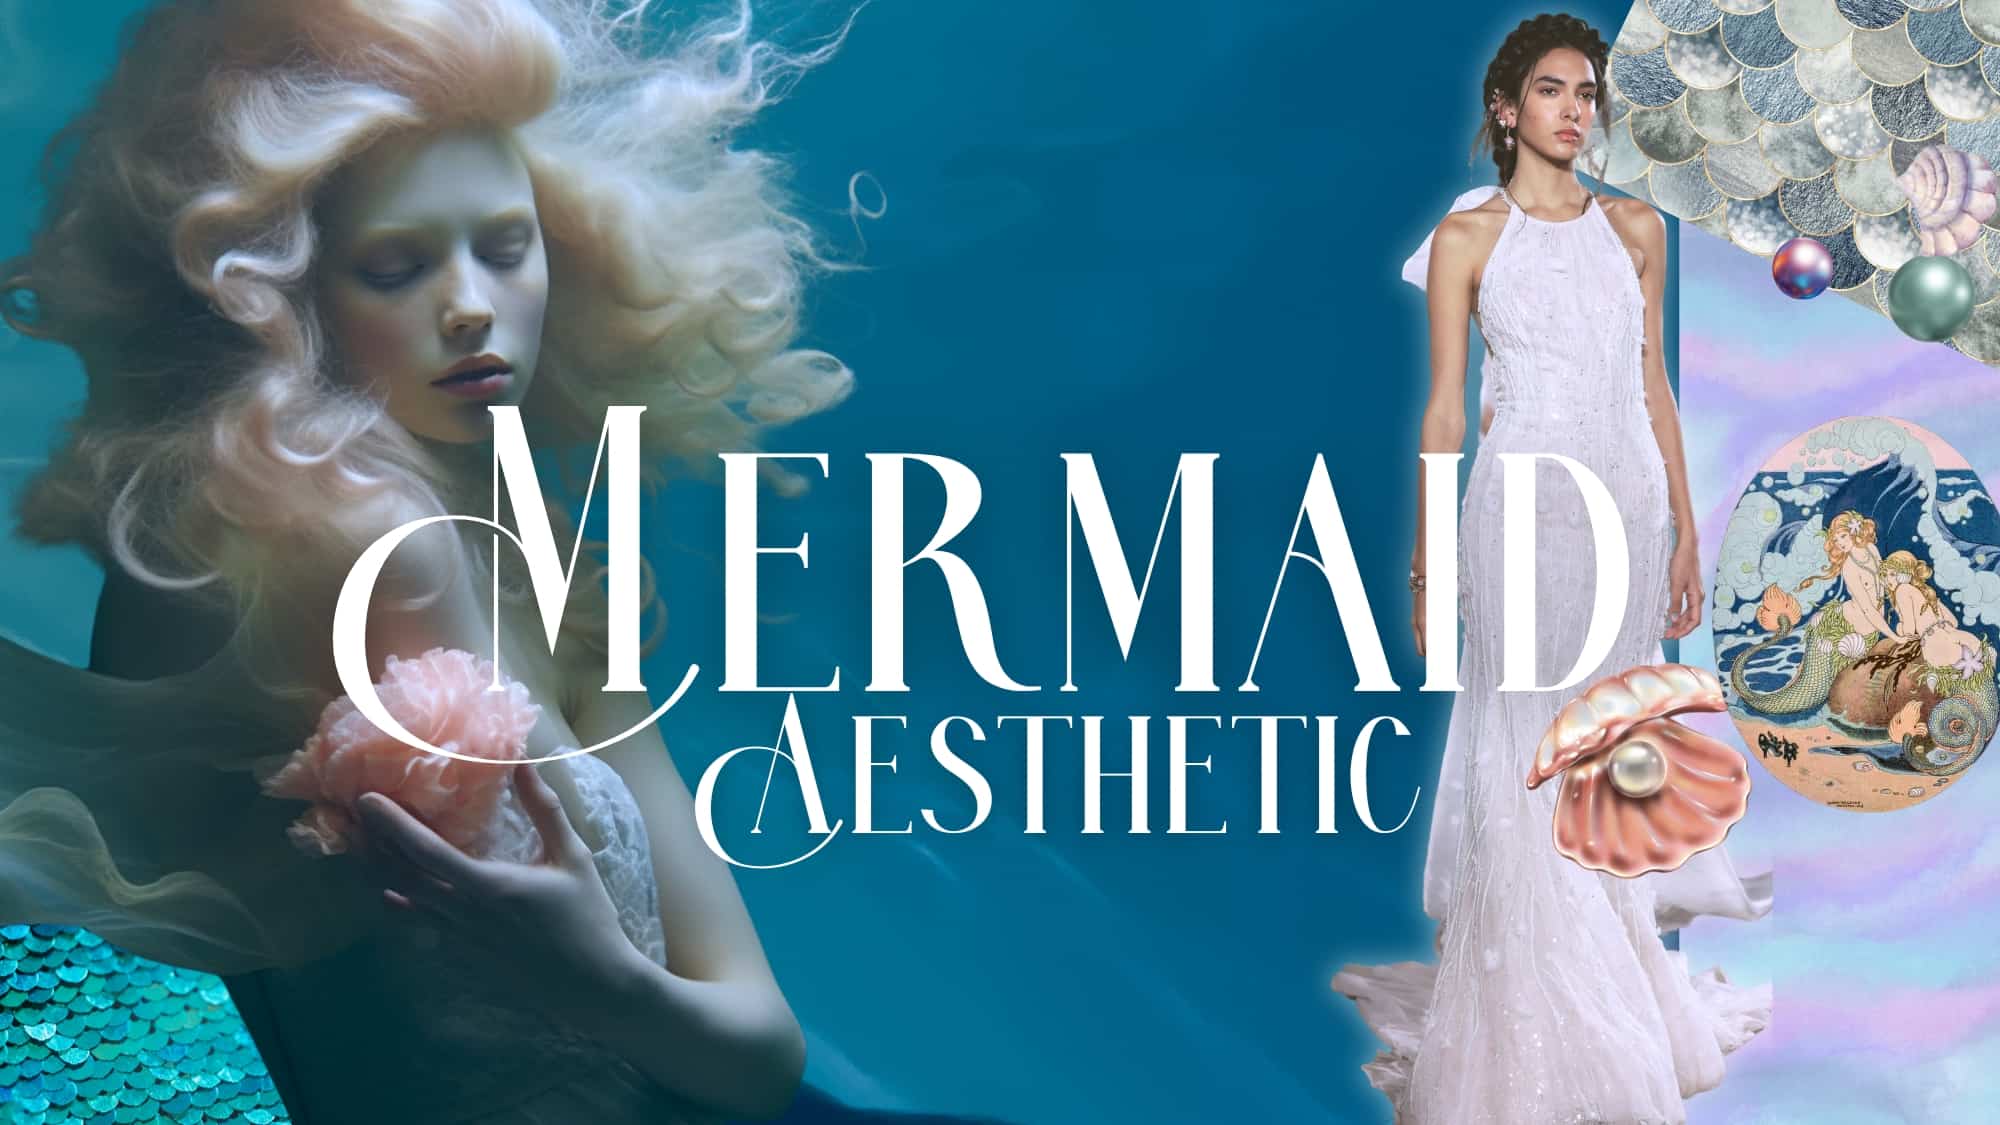 mermaid aesthtic with woman in floaty dress under water and runway fashion image